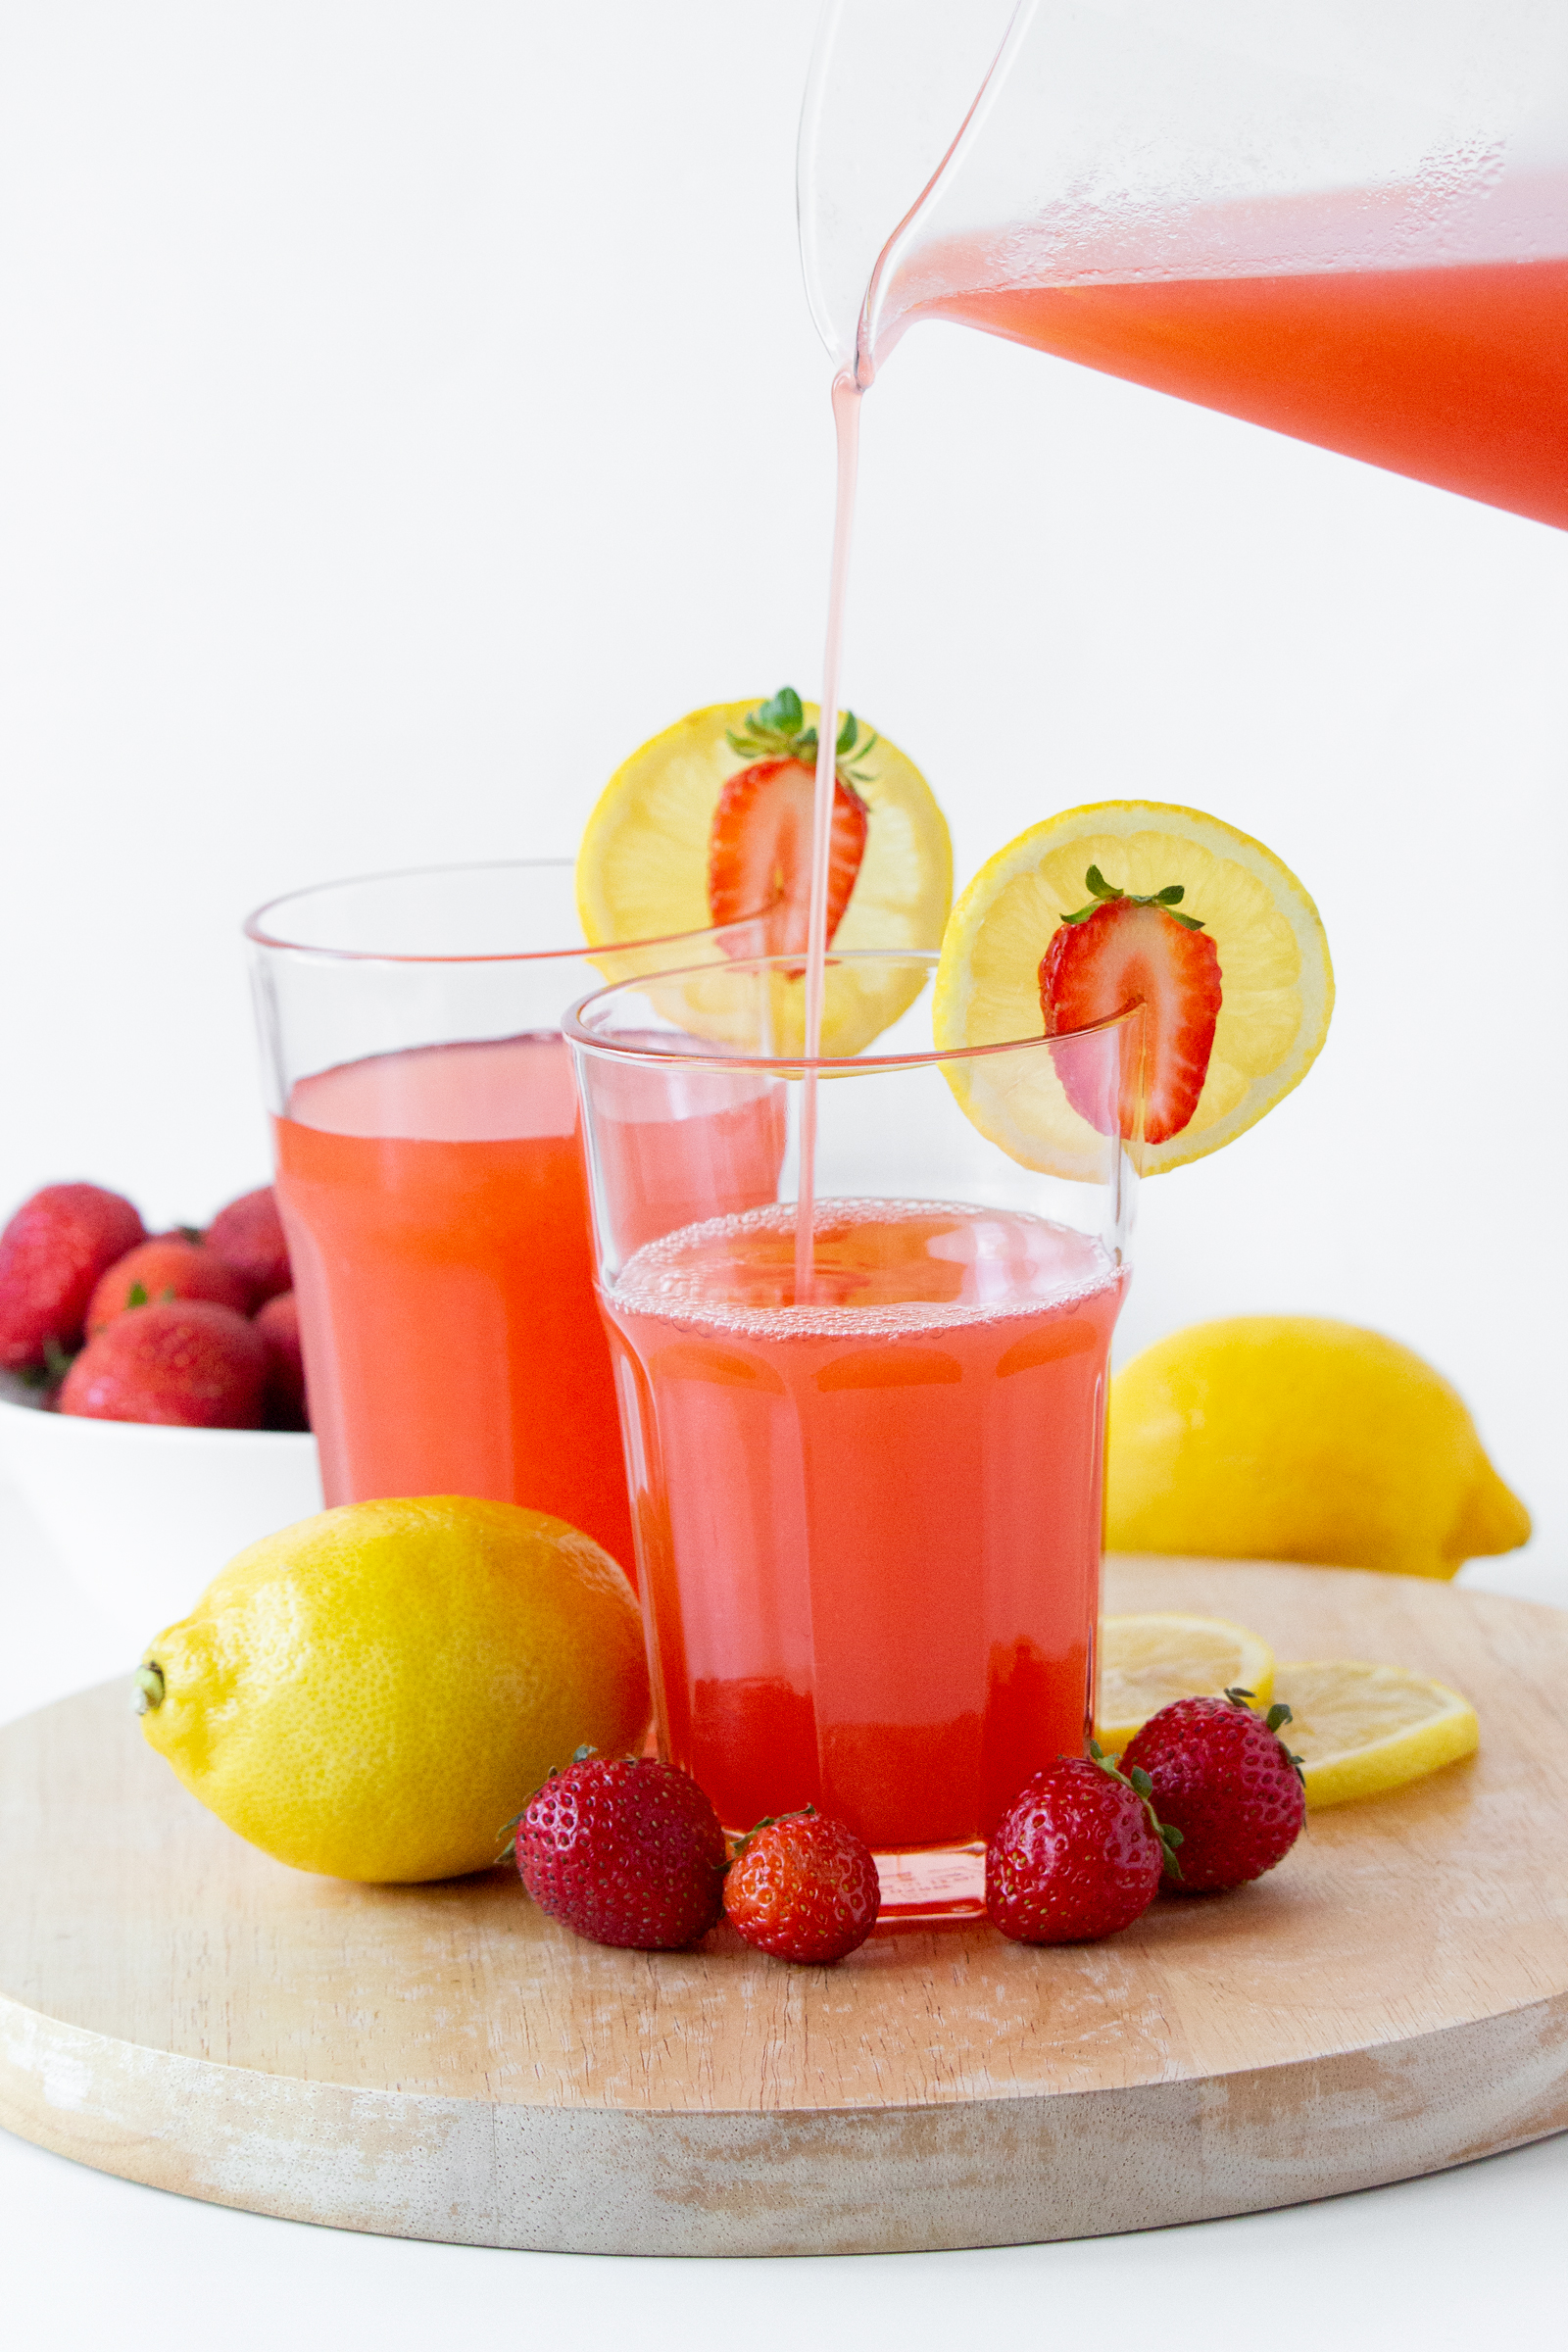 easy-strawberry-lemonade-pouring-into-glass-ch-yuzuberry